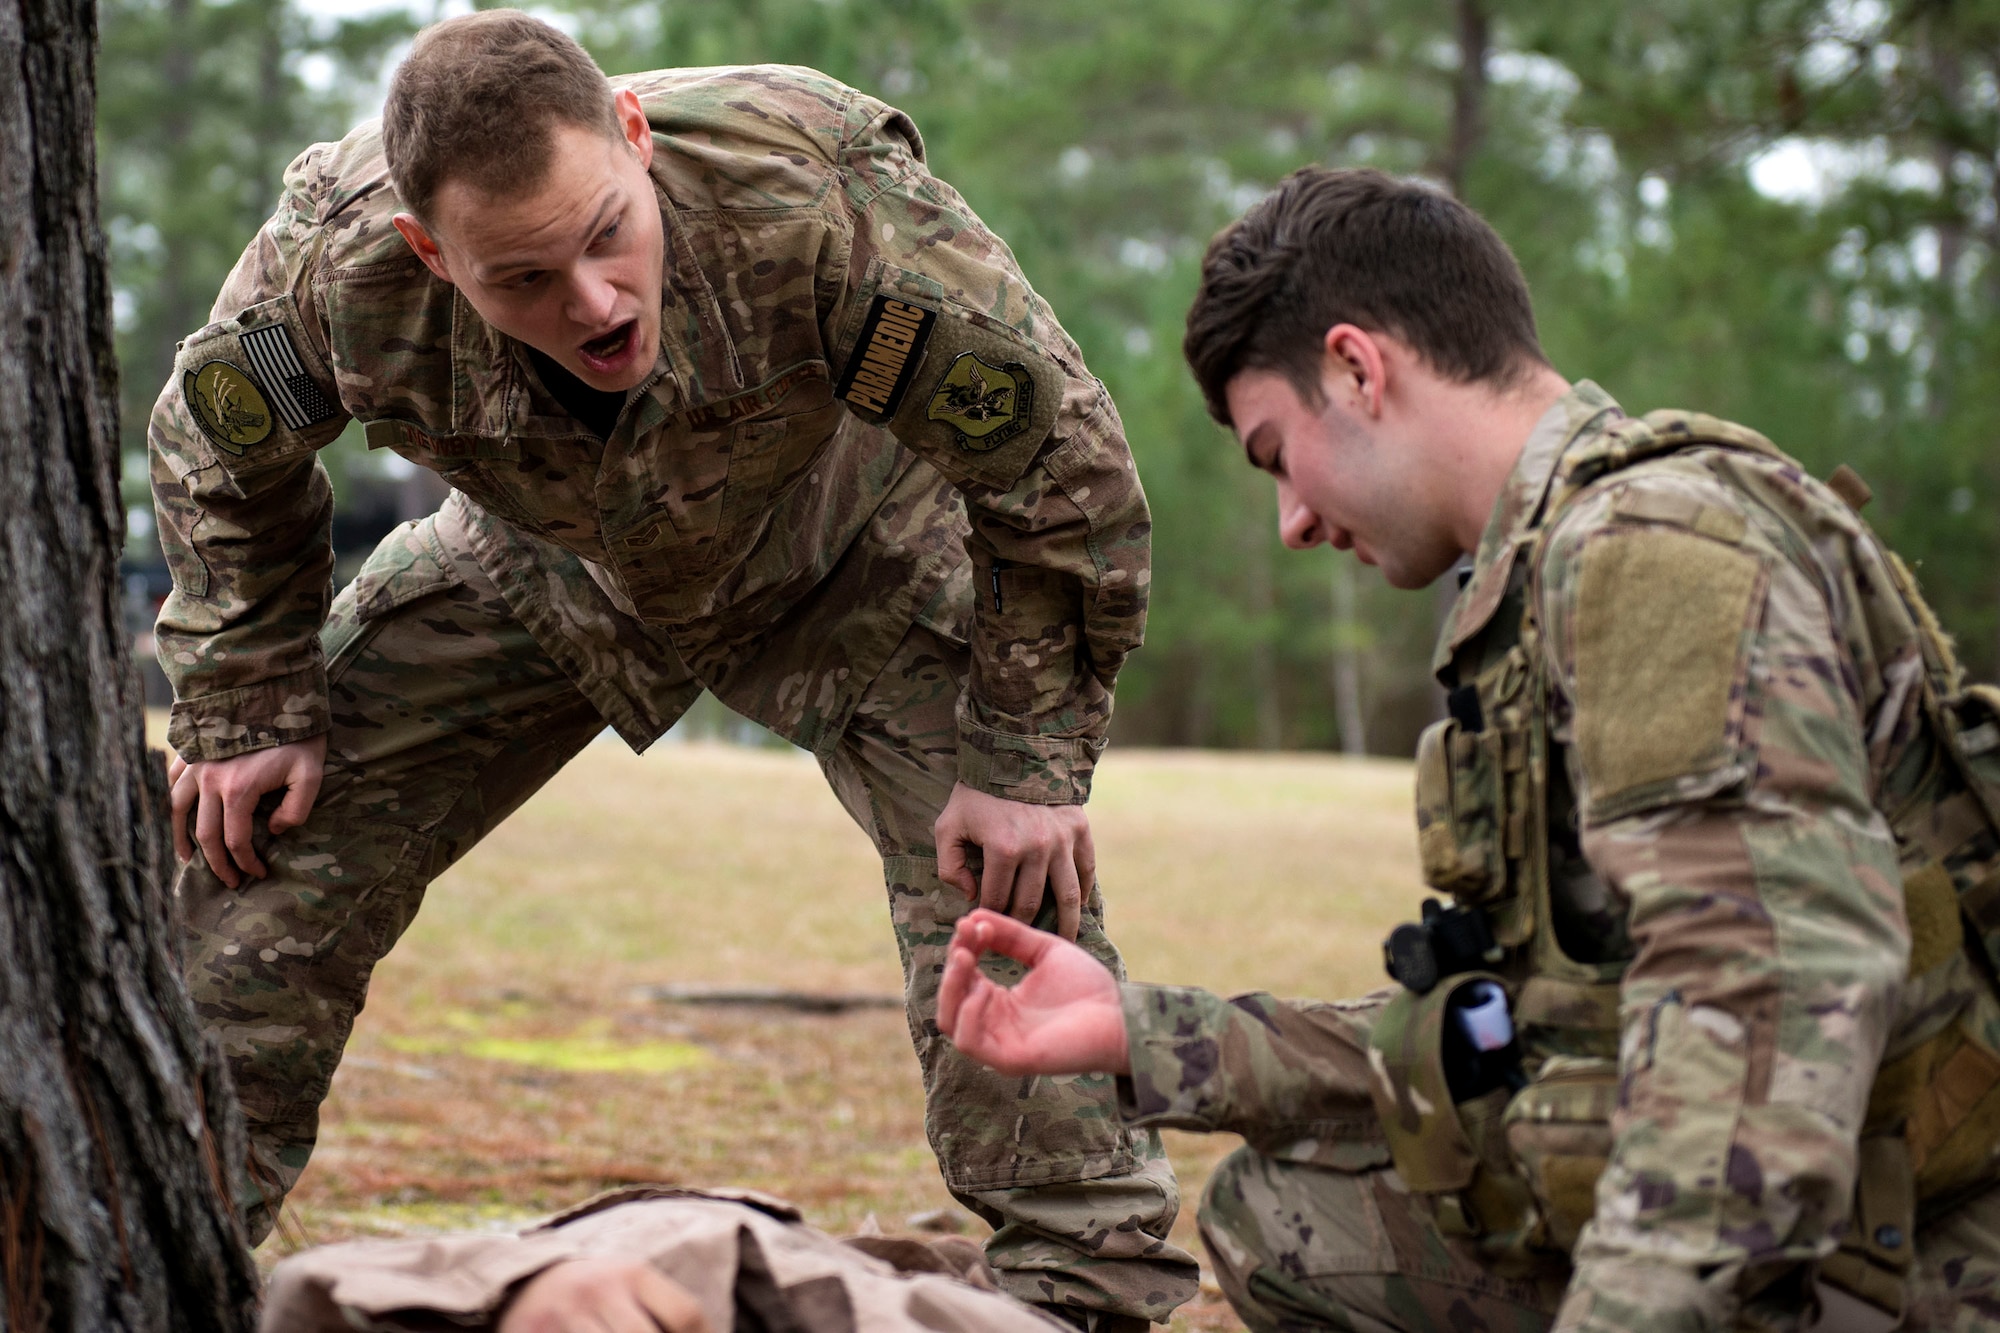 Staff Sgt. Cory Newby, left, 347th Operations Support Squadron (OSS) independent duty medical technician paramedic, yells at Airman 1st Class Elijah Bishop, 347th OSS intelligence analyst, during a Tactical Combat Casualty Care course, Feb. 14, 2018, at Moody Air Force Base, Ga. The training is designed to teach Airmen how to apply critical life-saving skills while engaged in a combat environment. (U.S. Air Force photo by Airman 1st Class Erick Requadt)